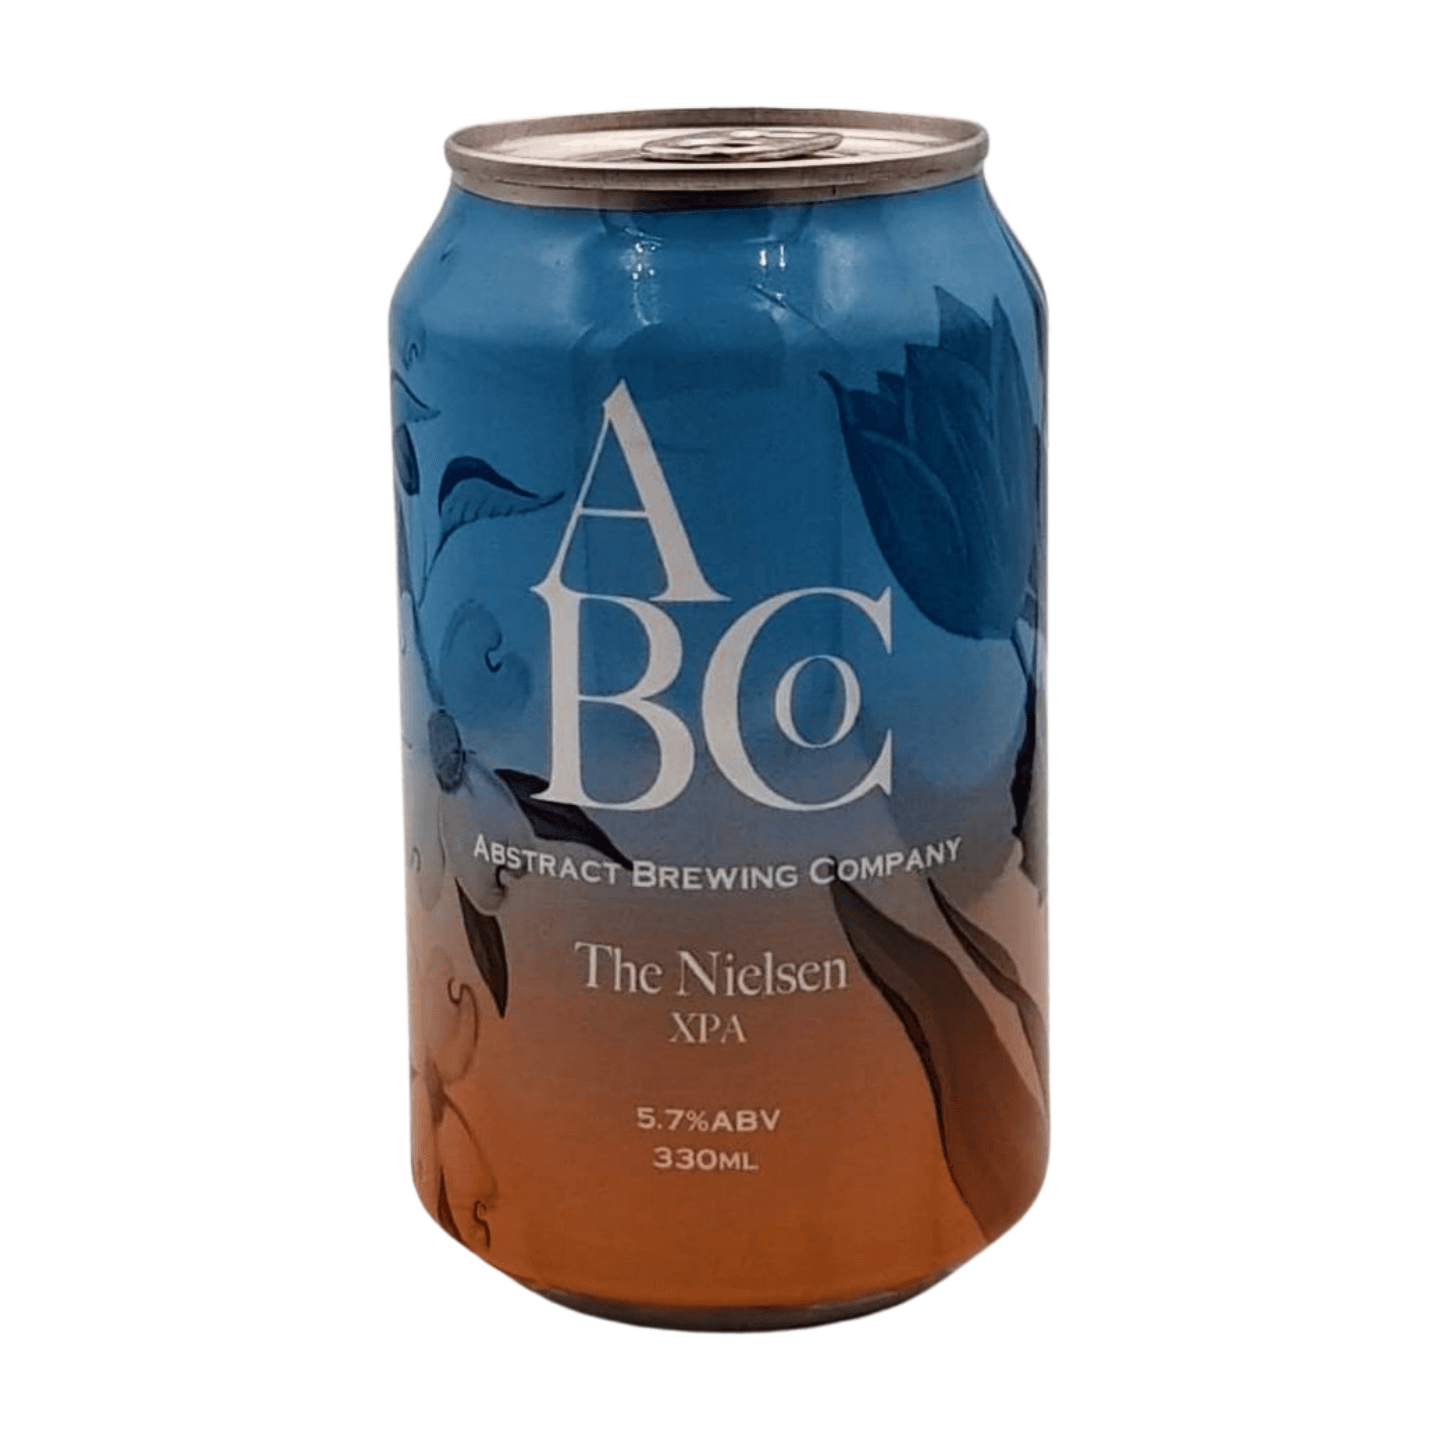 Abstract Brewing Company The Nielsen | Extra Pale Ale Webshop Online Verdins Bierwinkel Rotterdam